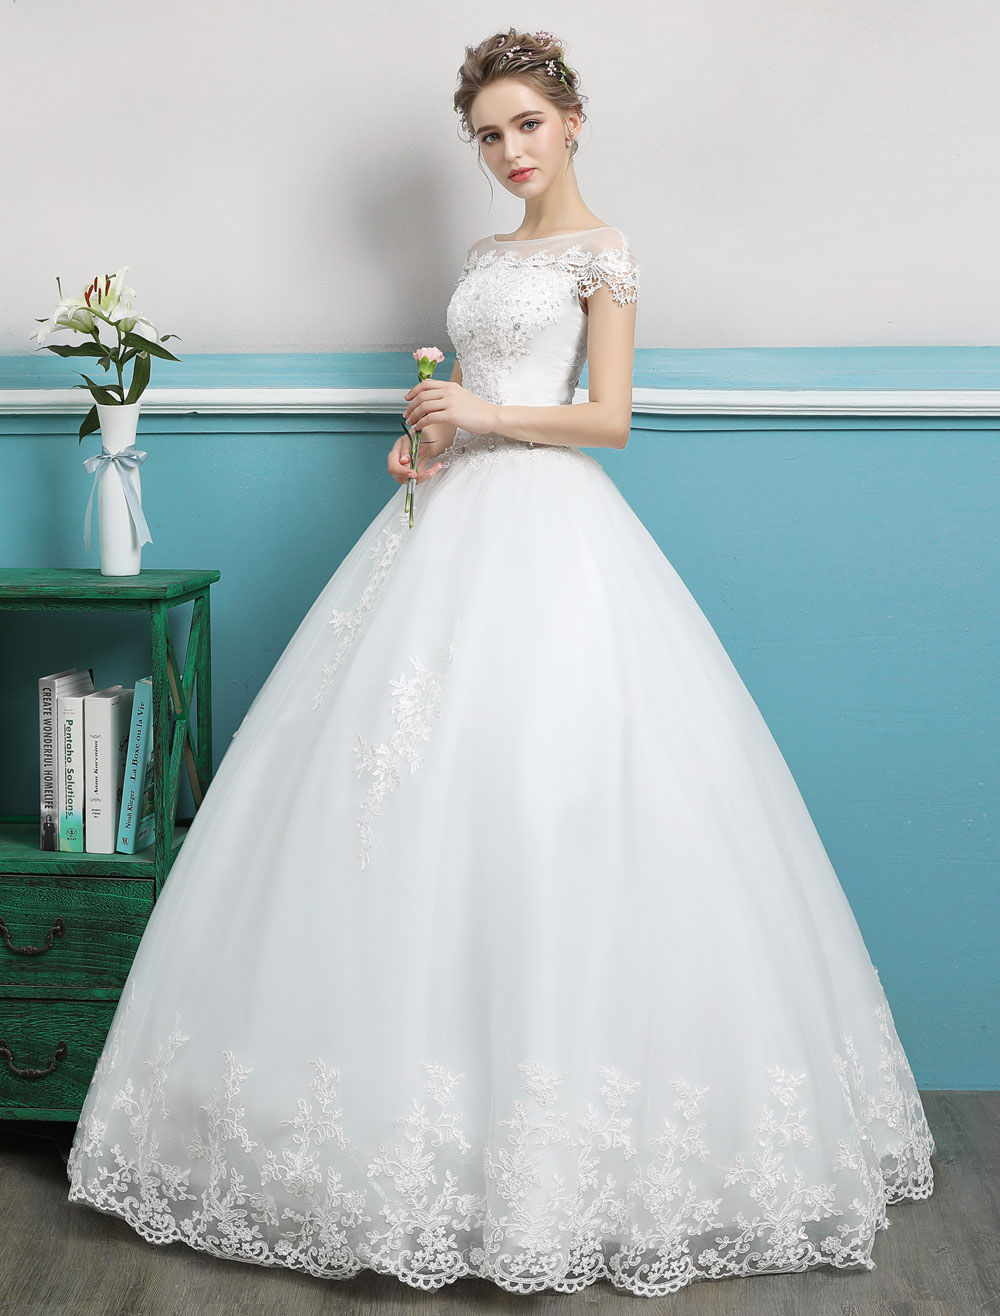 Princess Wedding Dresses Ball Gowns Lace Beaded Ivory Floor Length 